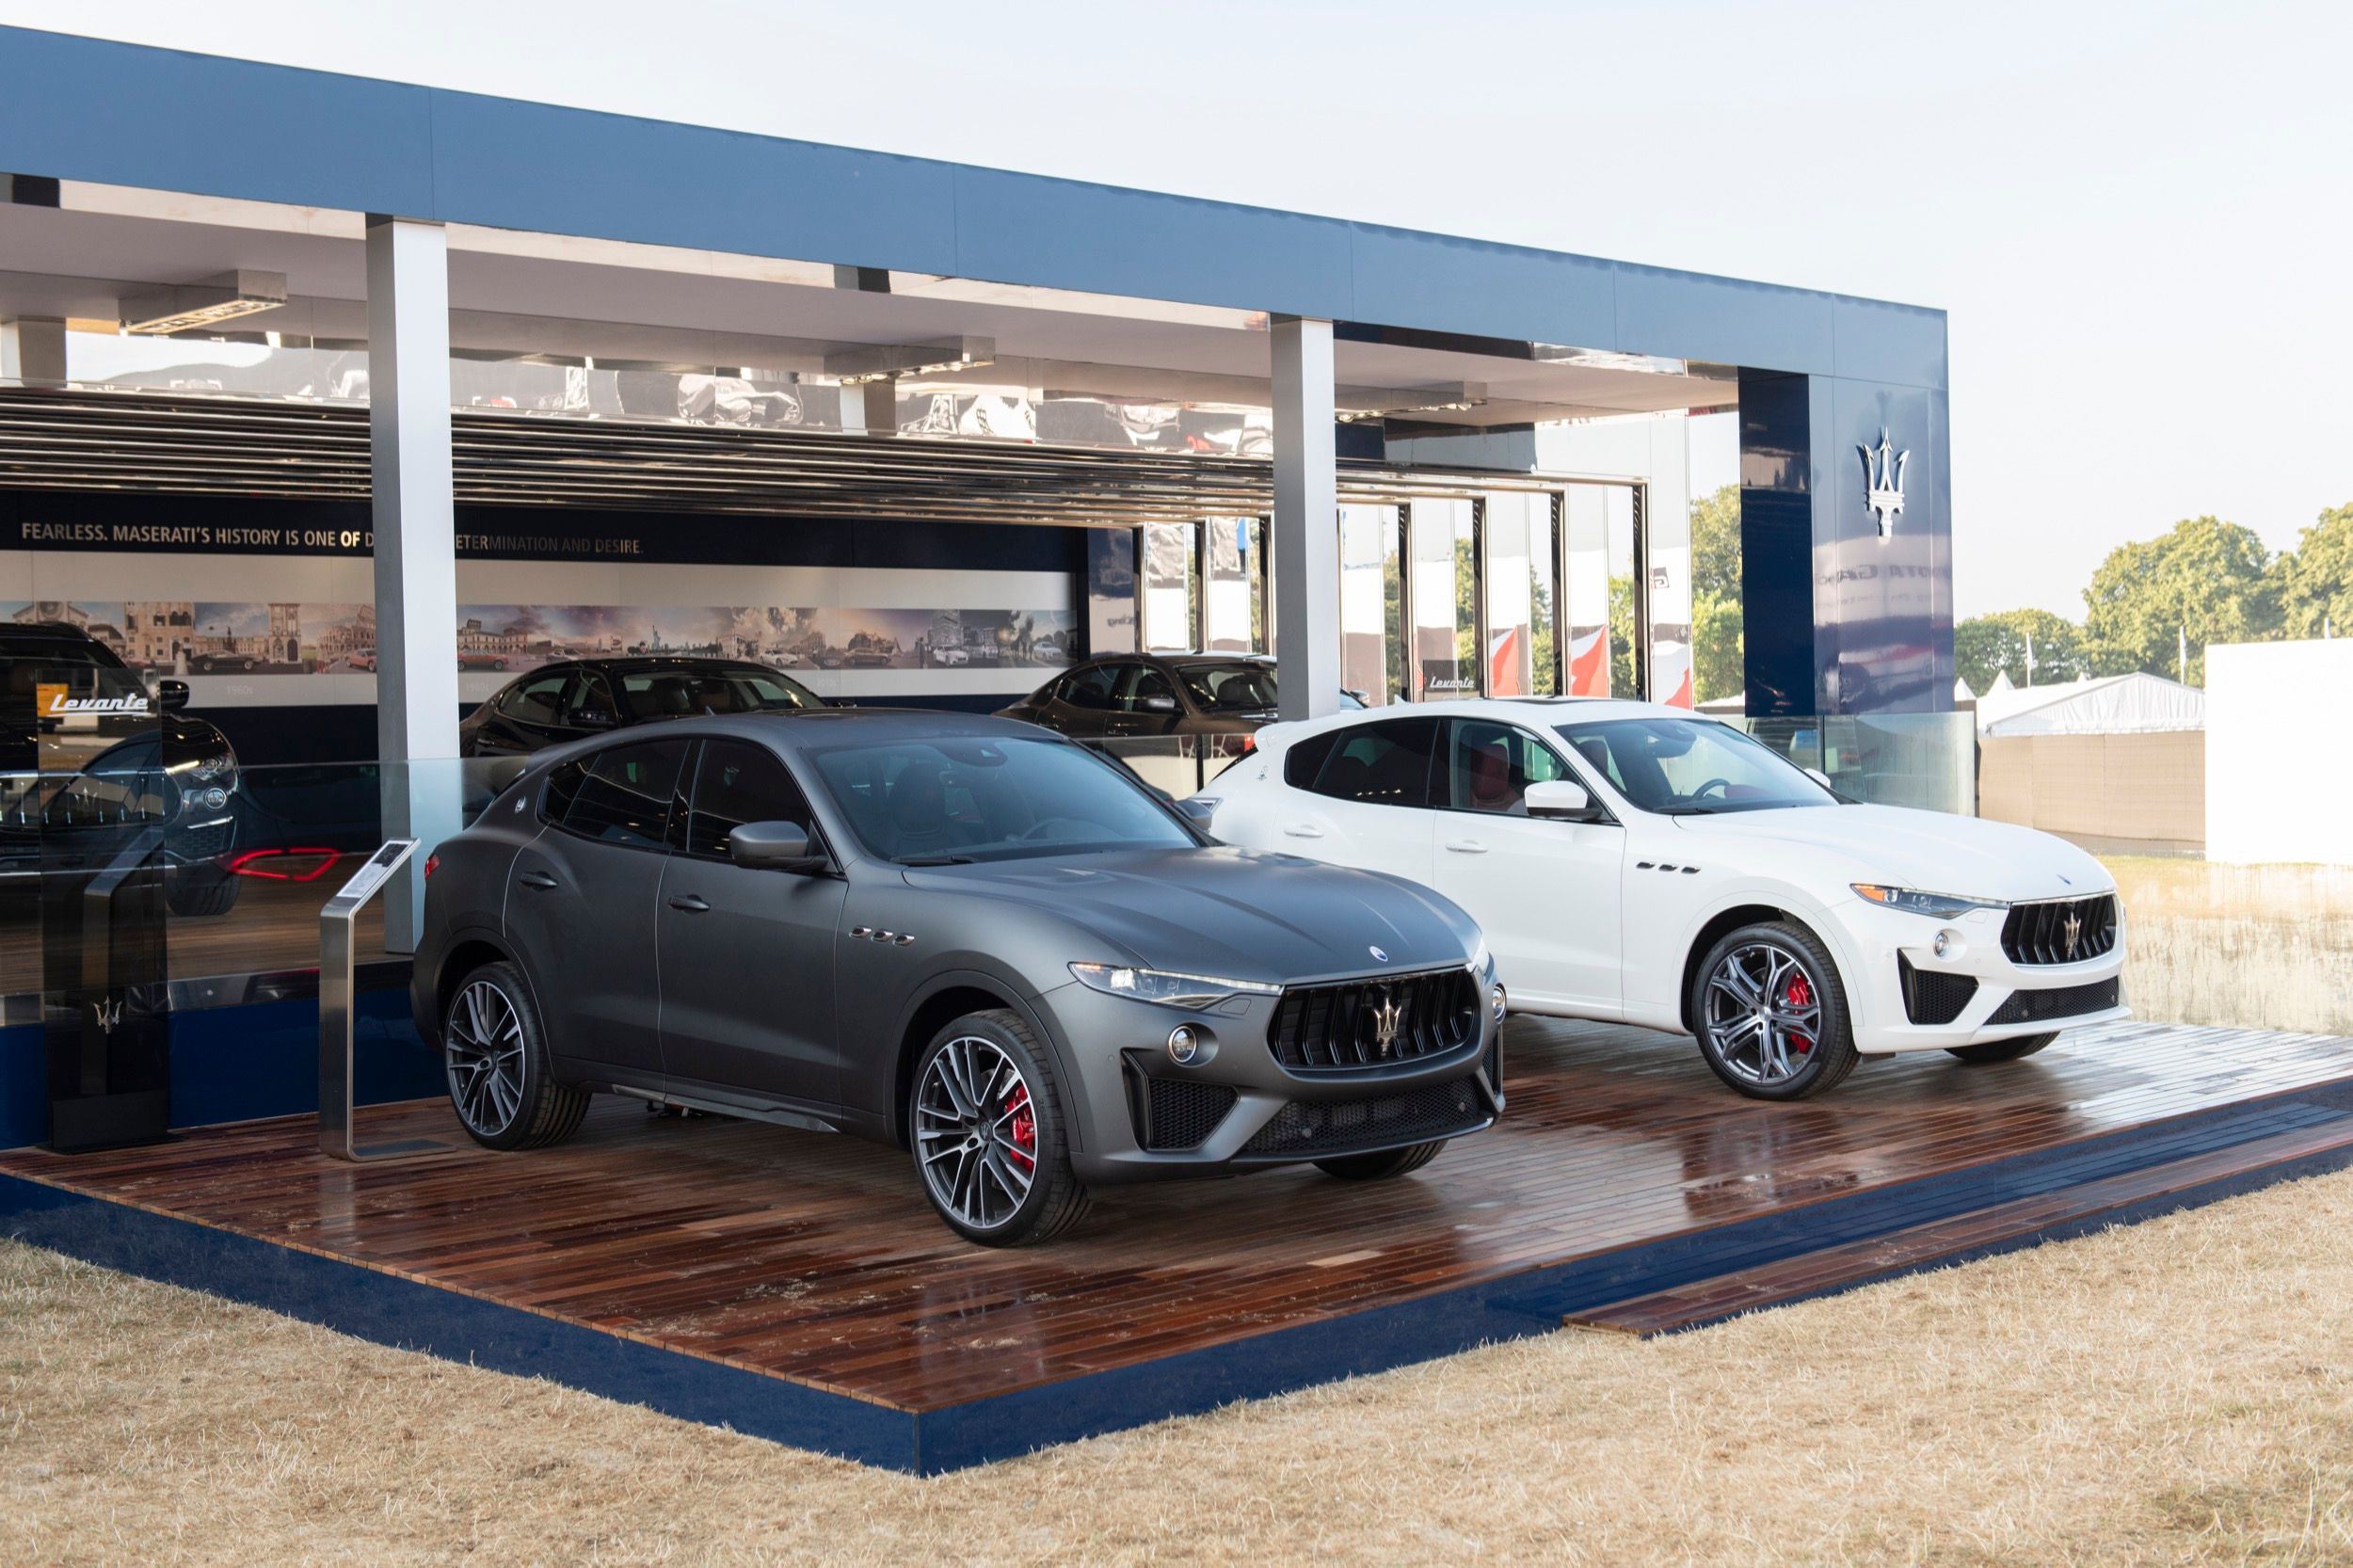 2018 Is There Any Meaningful Difference Between The Maserati Levante GTS And The Maserati Levante Trofeo?